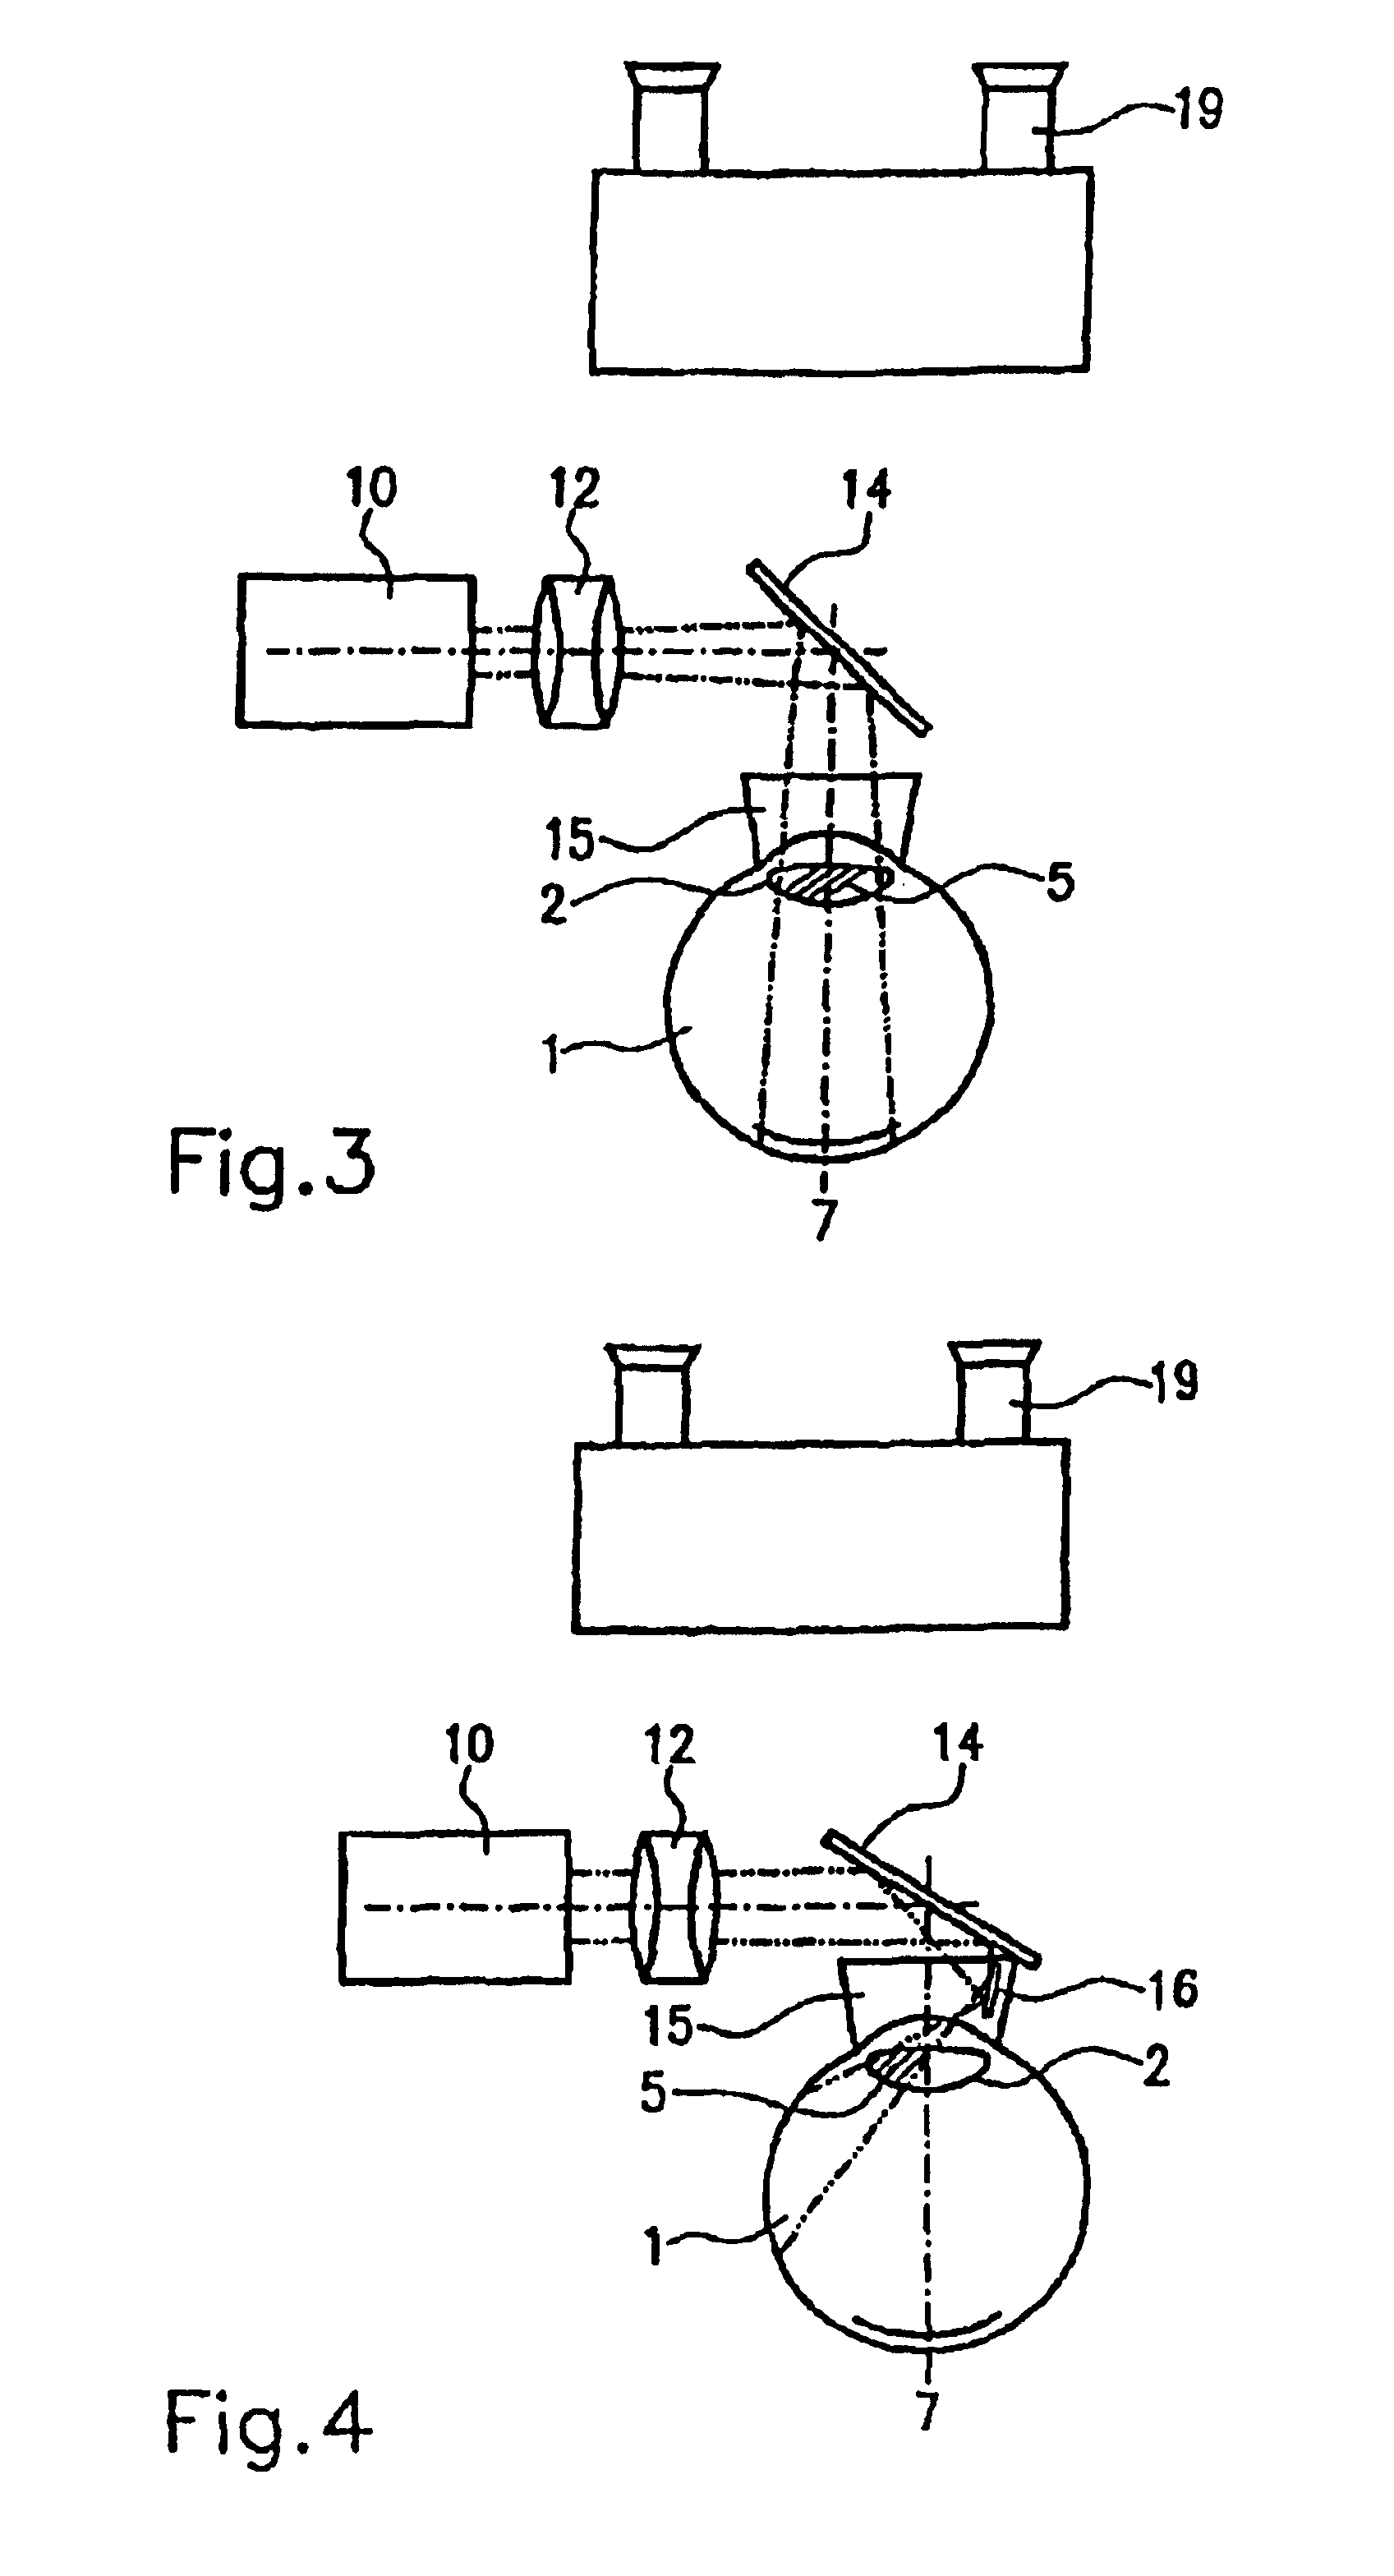 Method and device for treating opaqueness and/or hardening of a closed eye